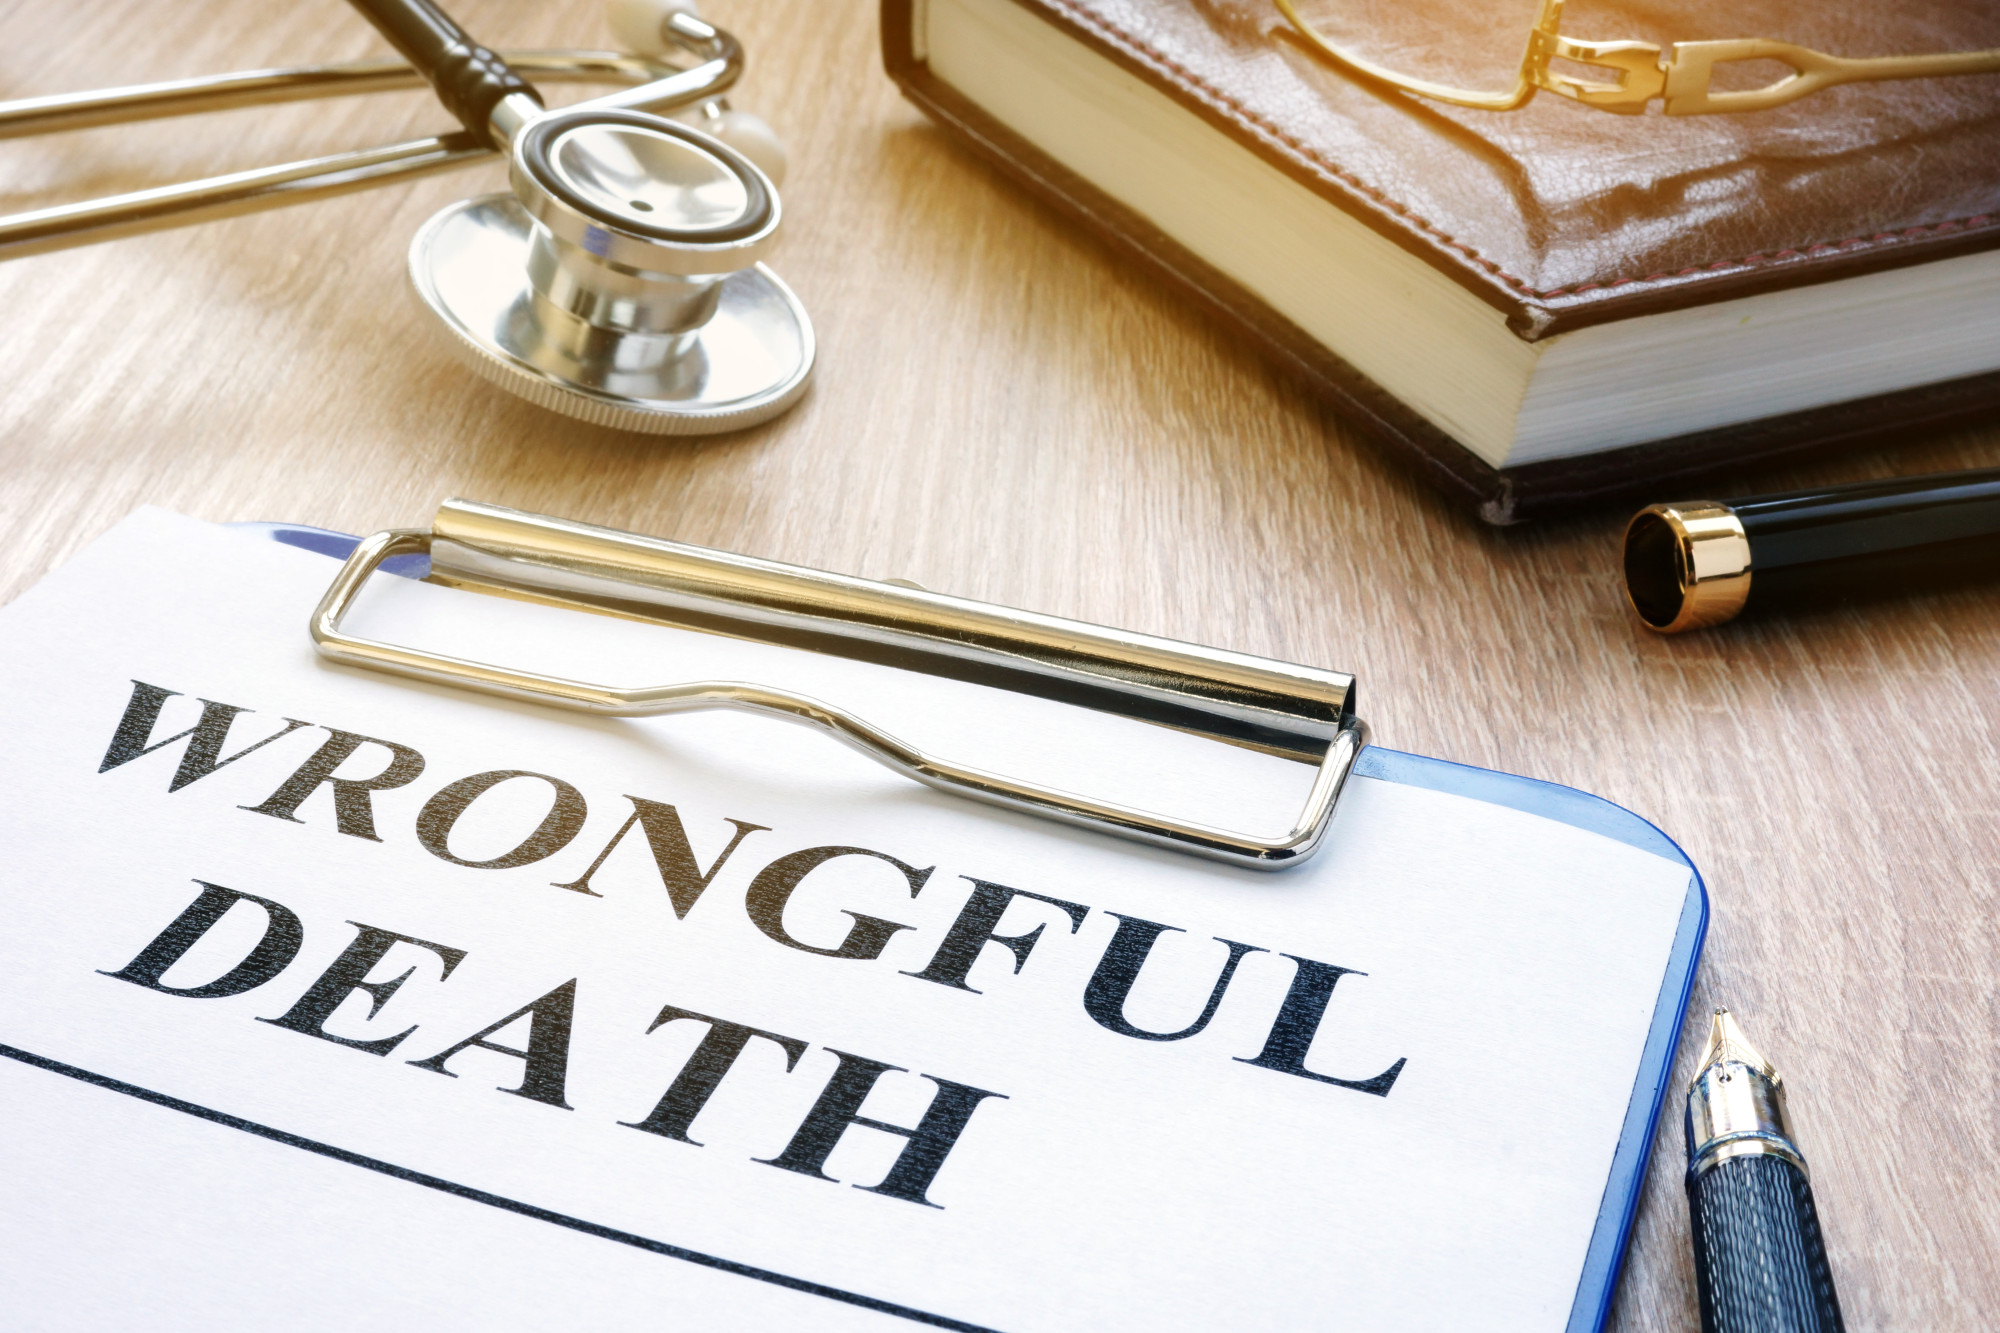 A wrongful death attorney can help recover damages, such as medical bills.